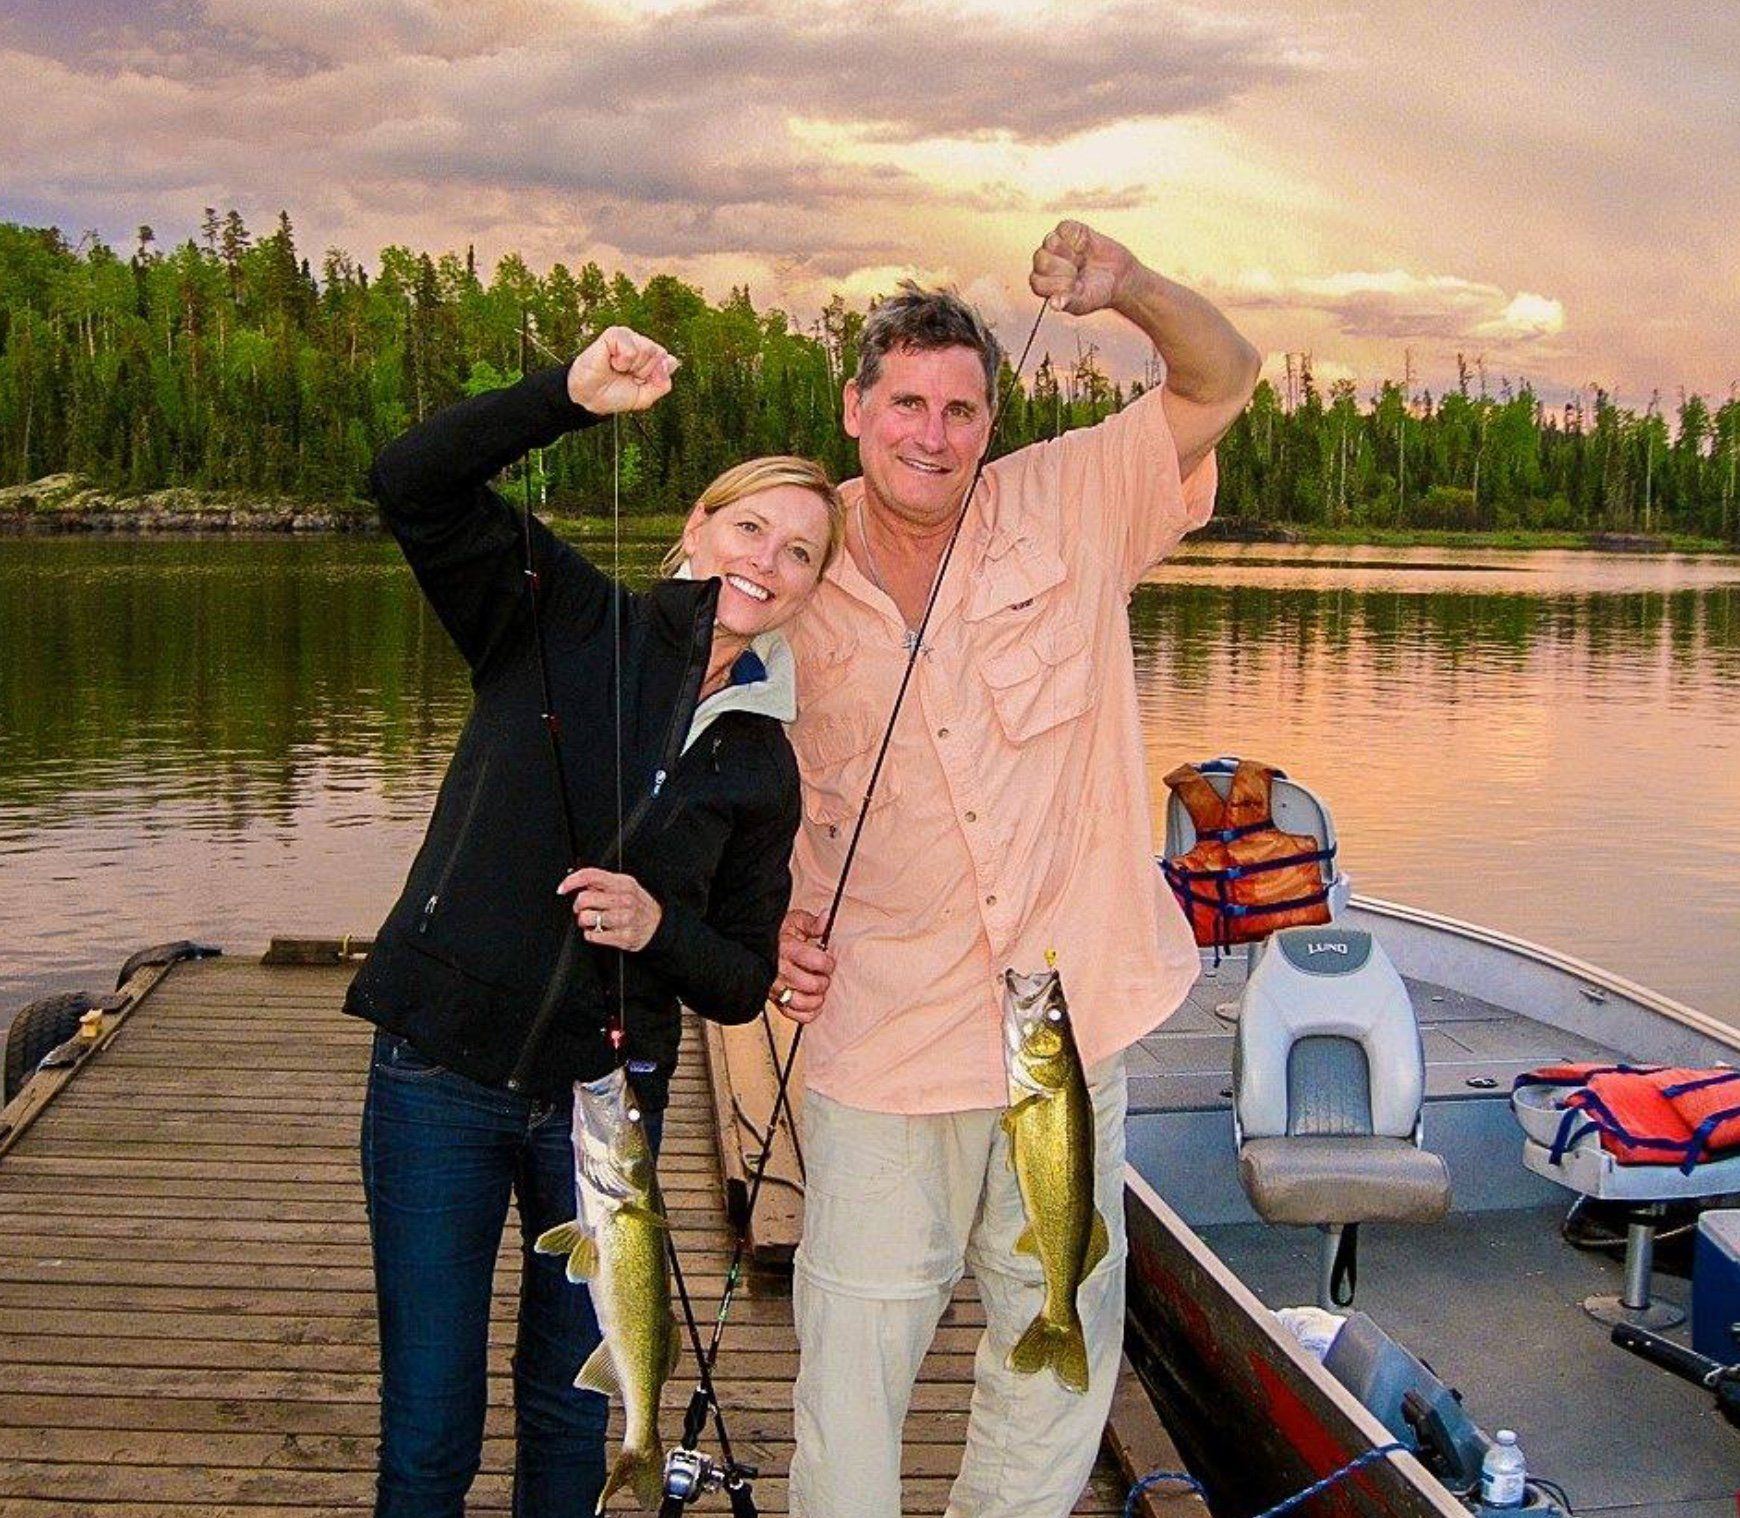 Honeymoon fly-in fishing vacation for couple.